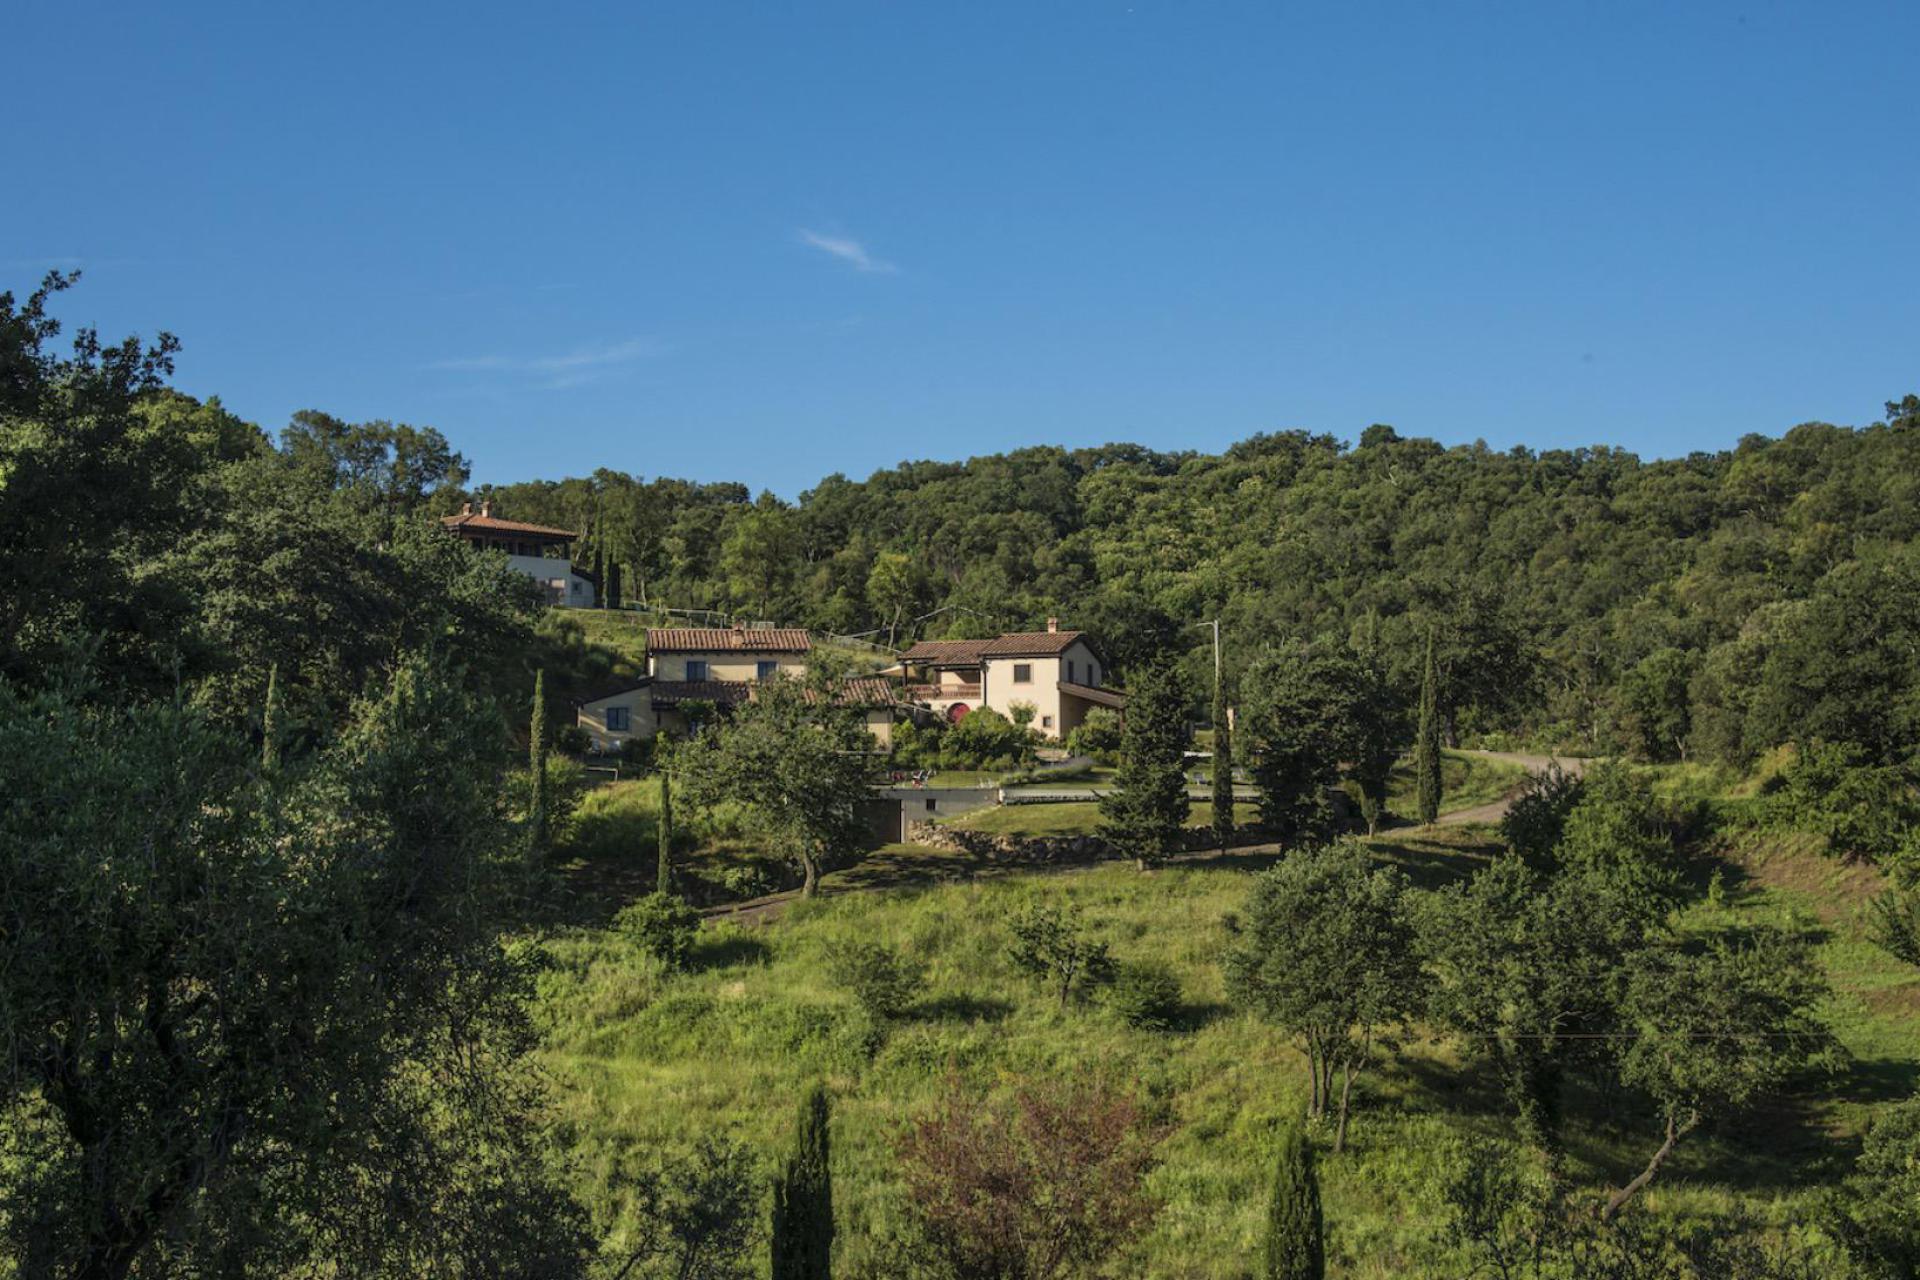 Agriturismo Tuscany Agriturismo with luxury houses on a hill in Tuscany